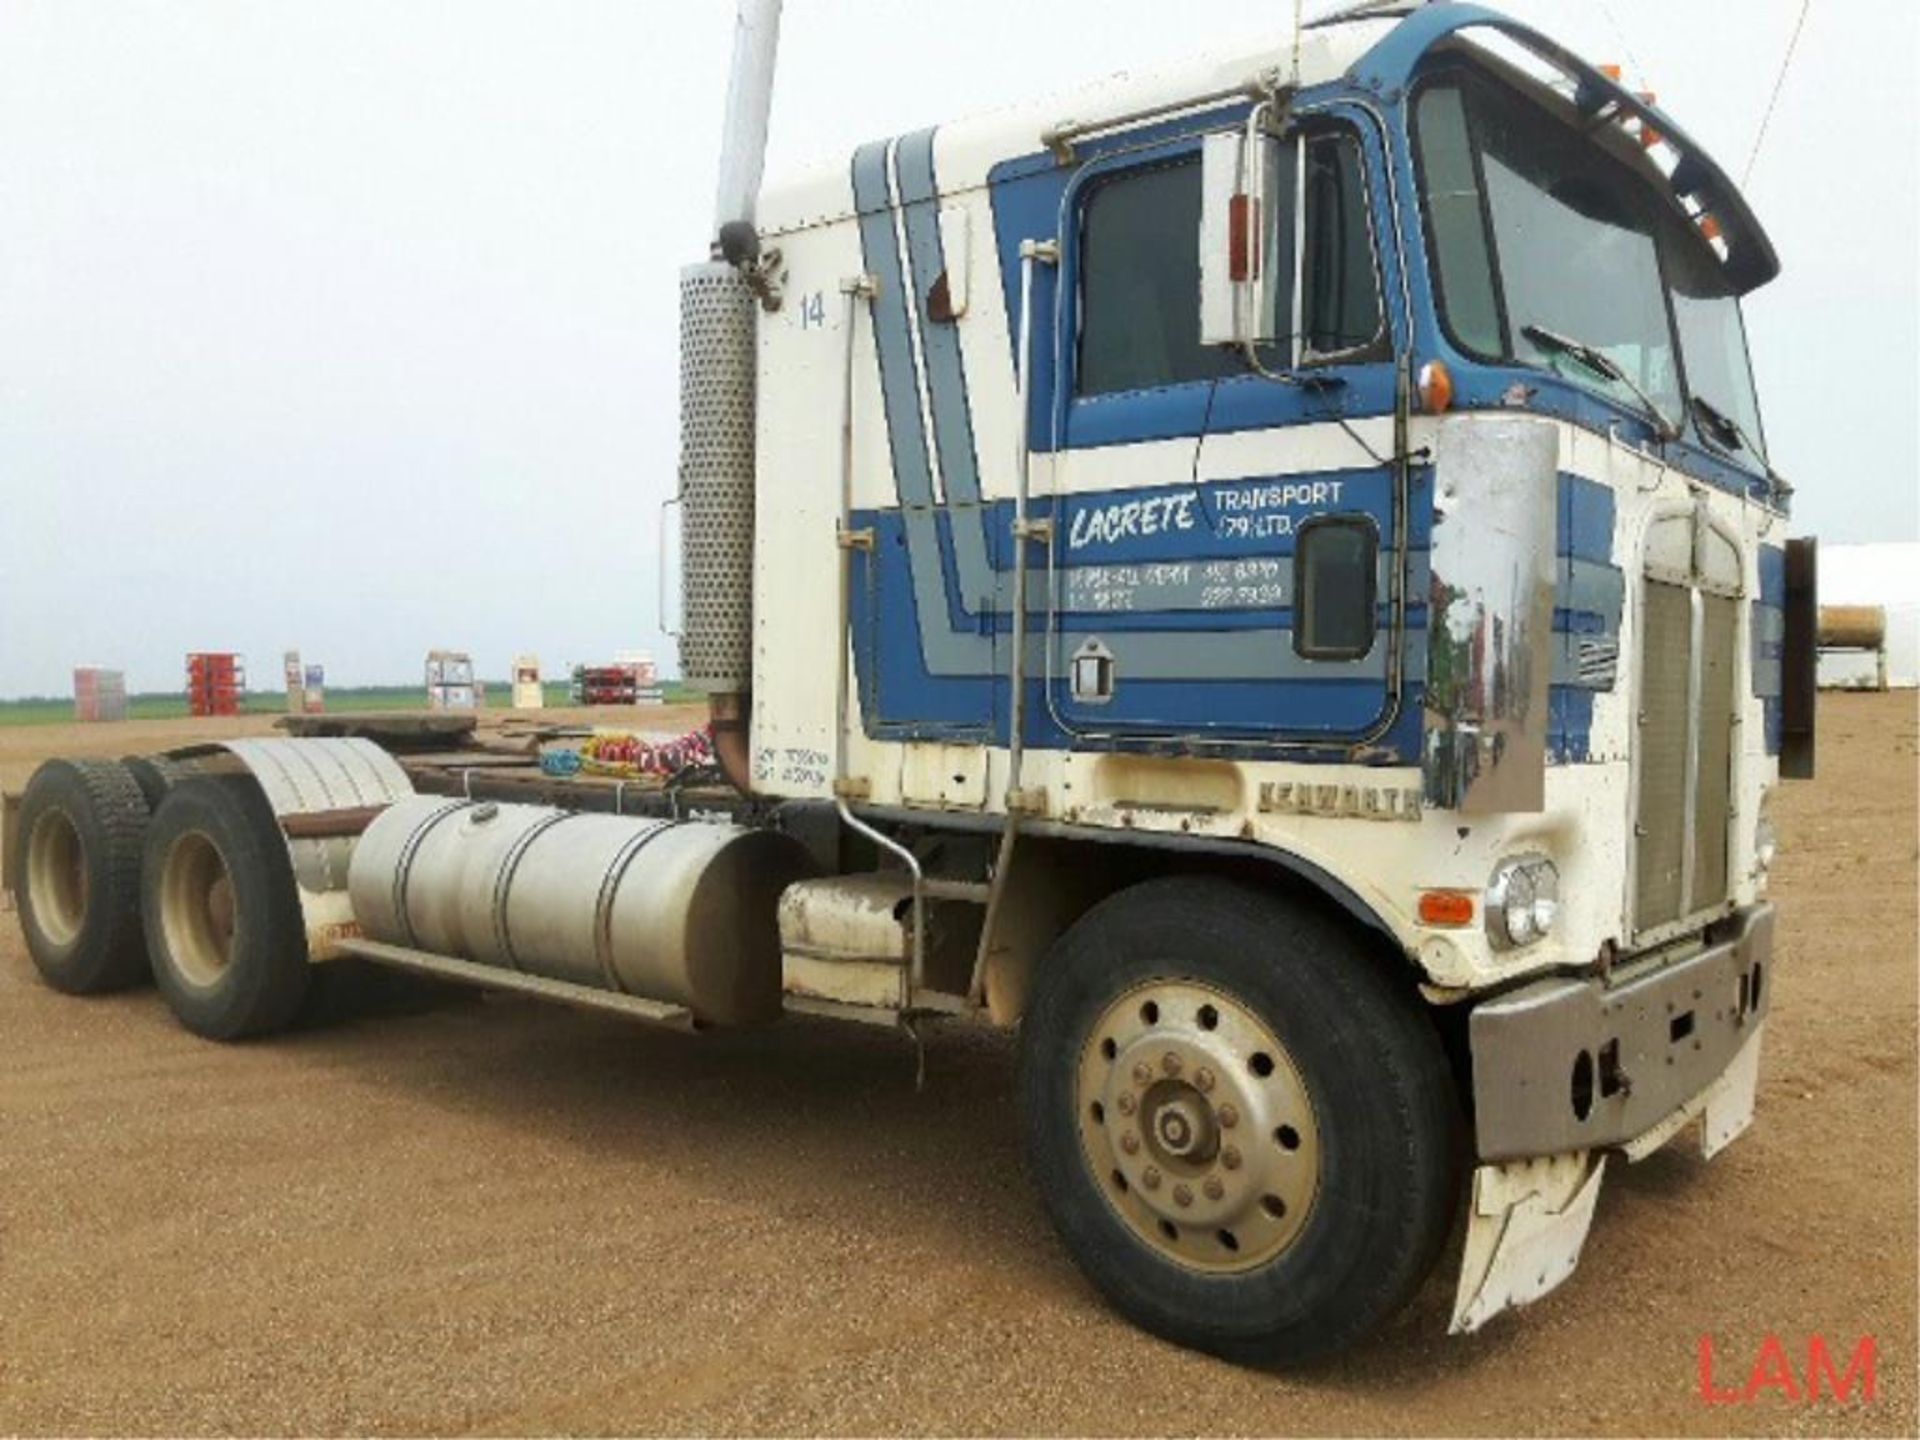 1981 KW K100 T/A Cab Over Truck Tractor sn M810165 Air Ride, 13 spd, Cumming Eng. - Image 2 of 12